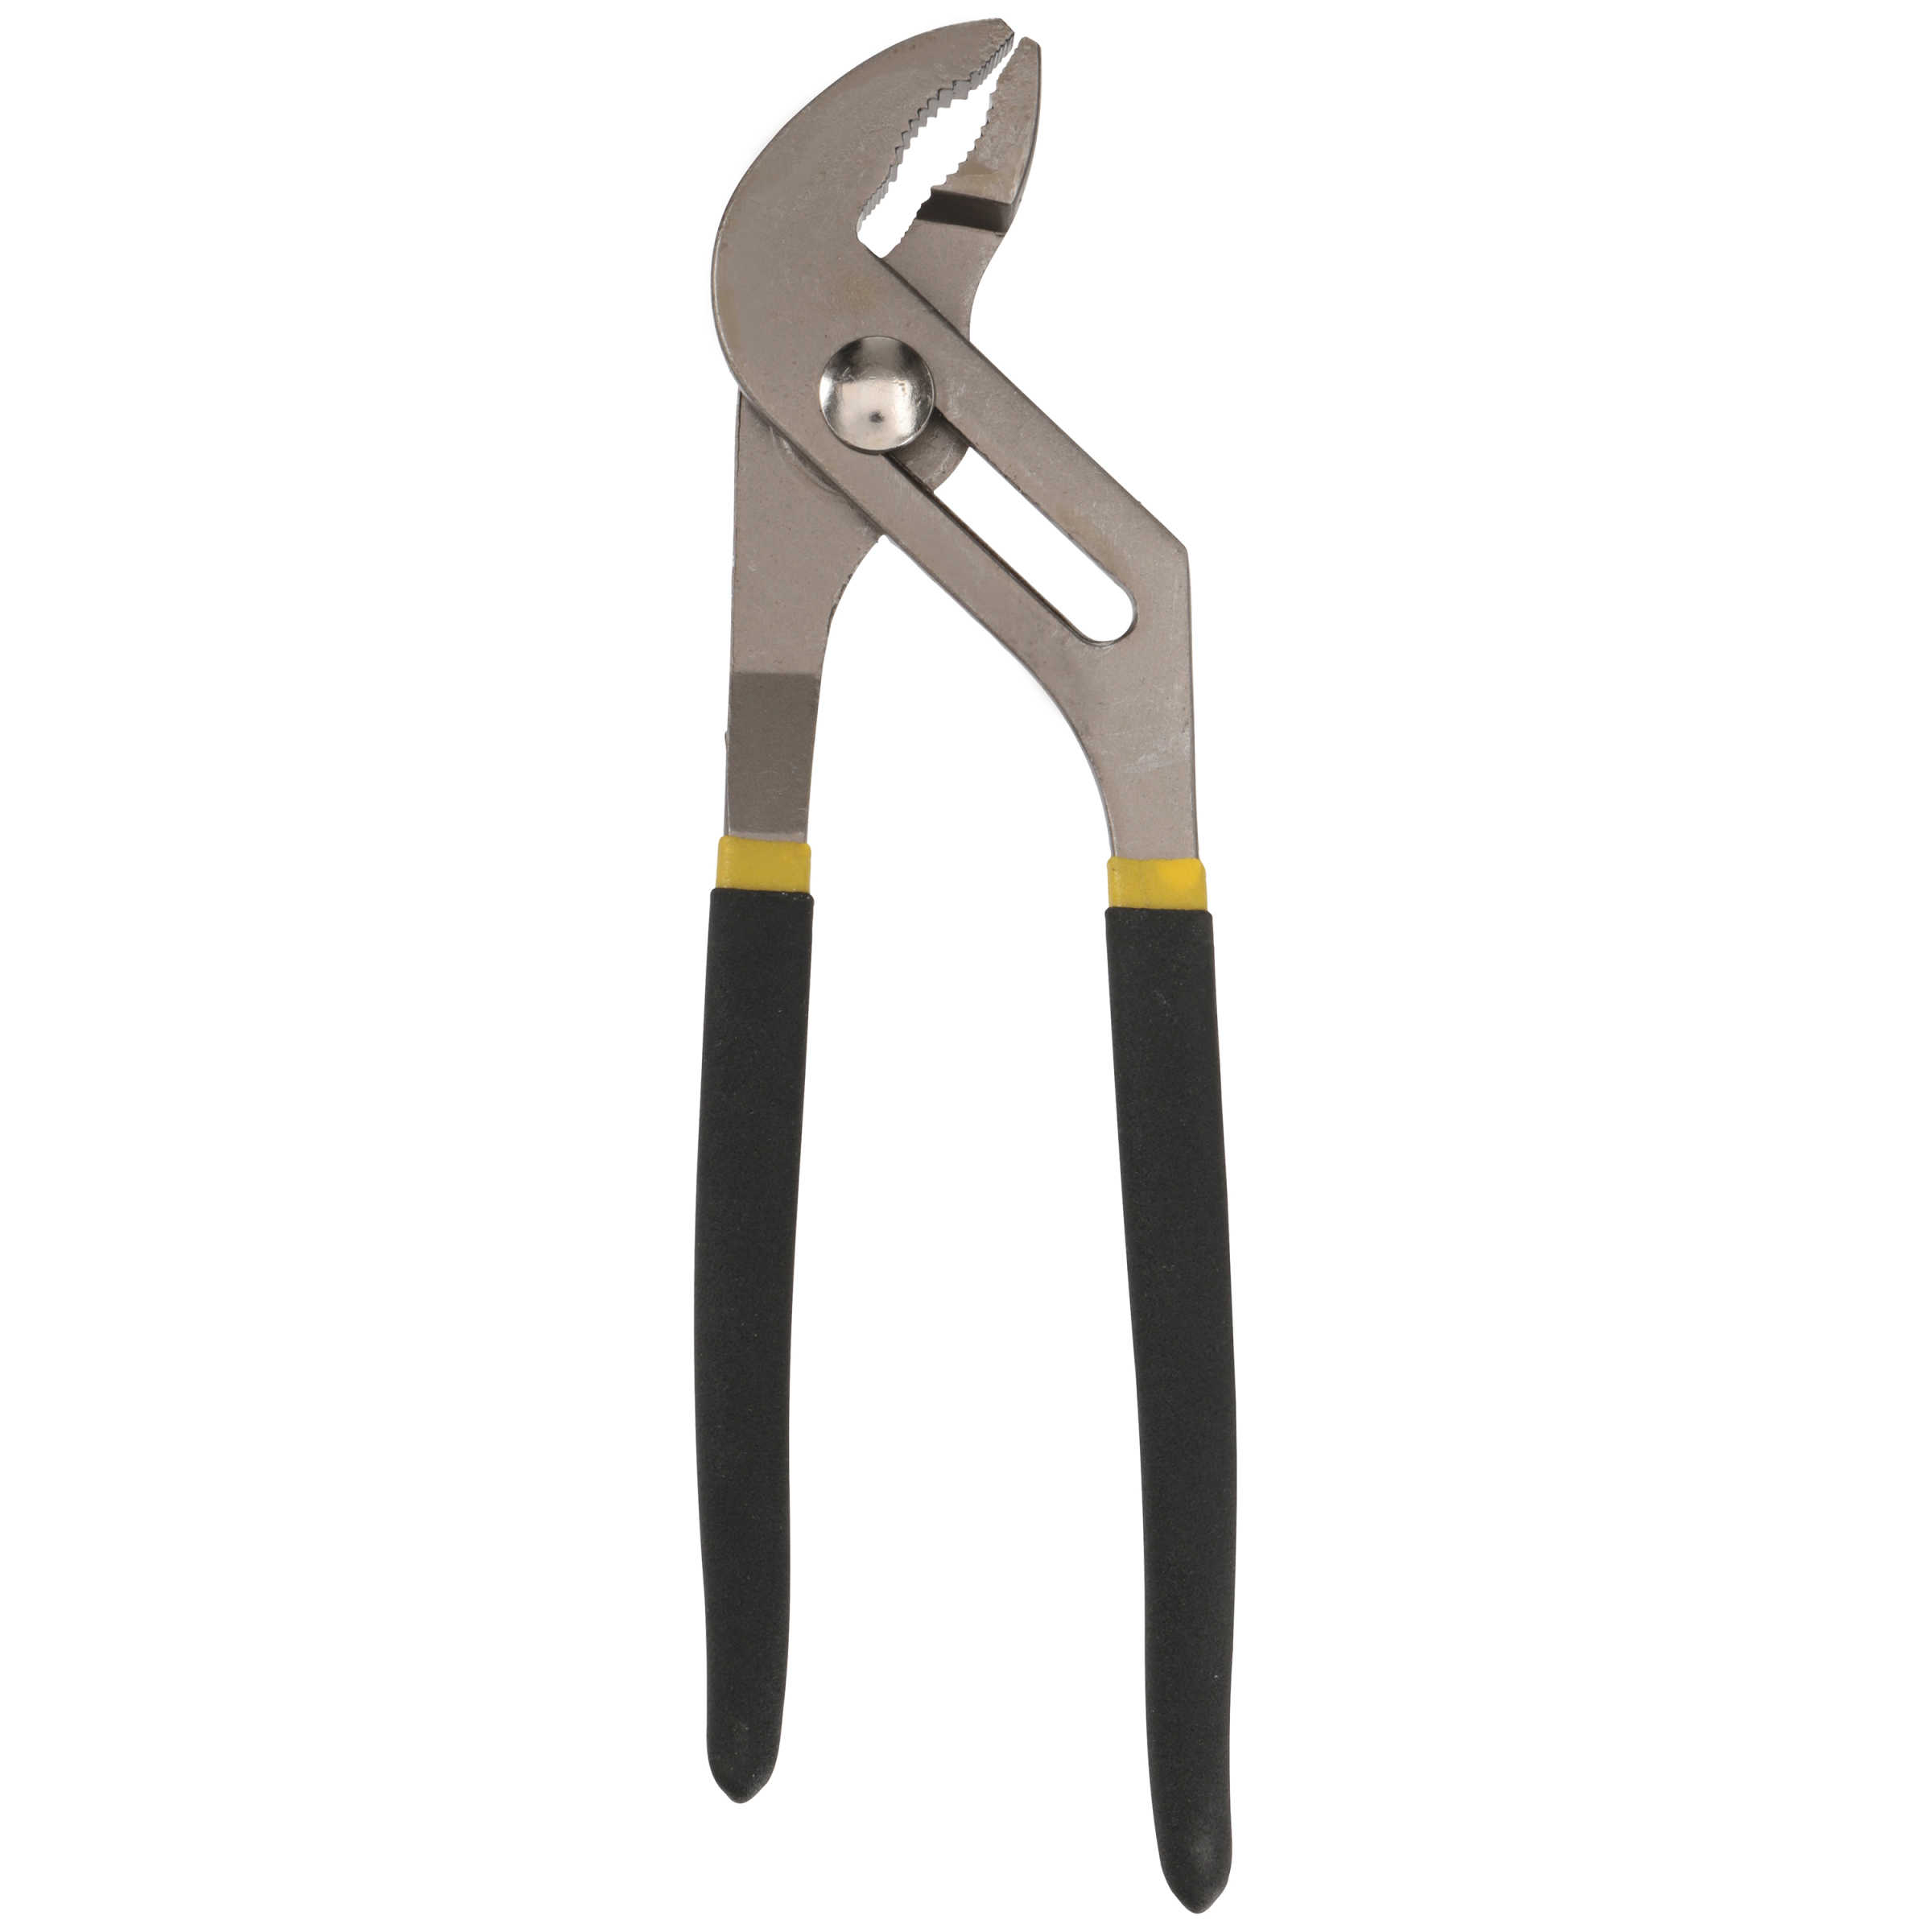 Stanley Groove Joint Pliers